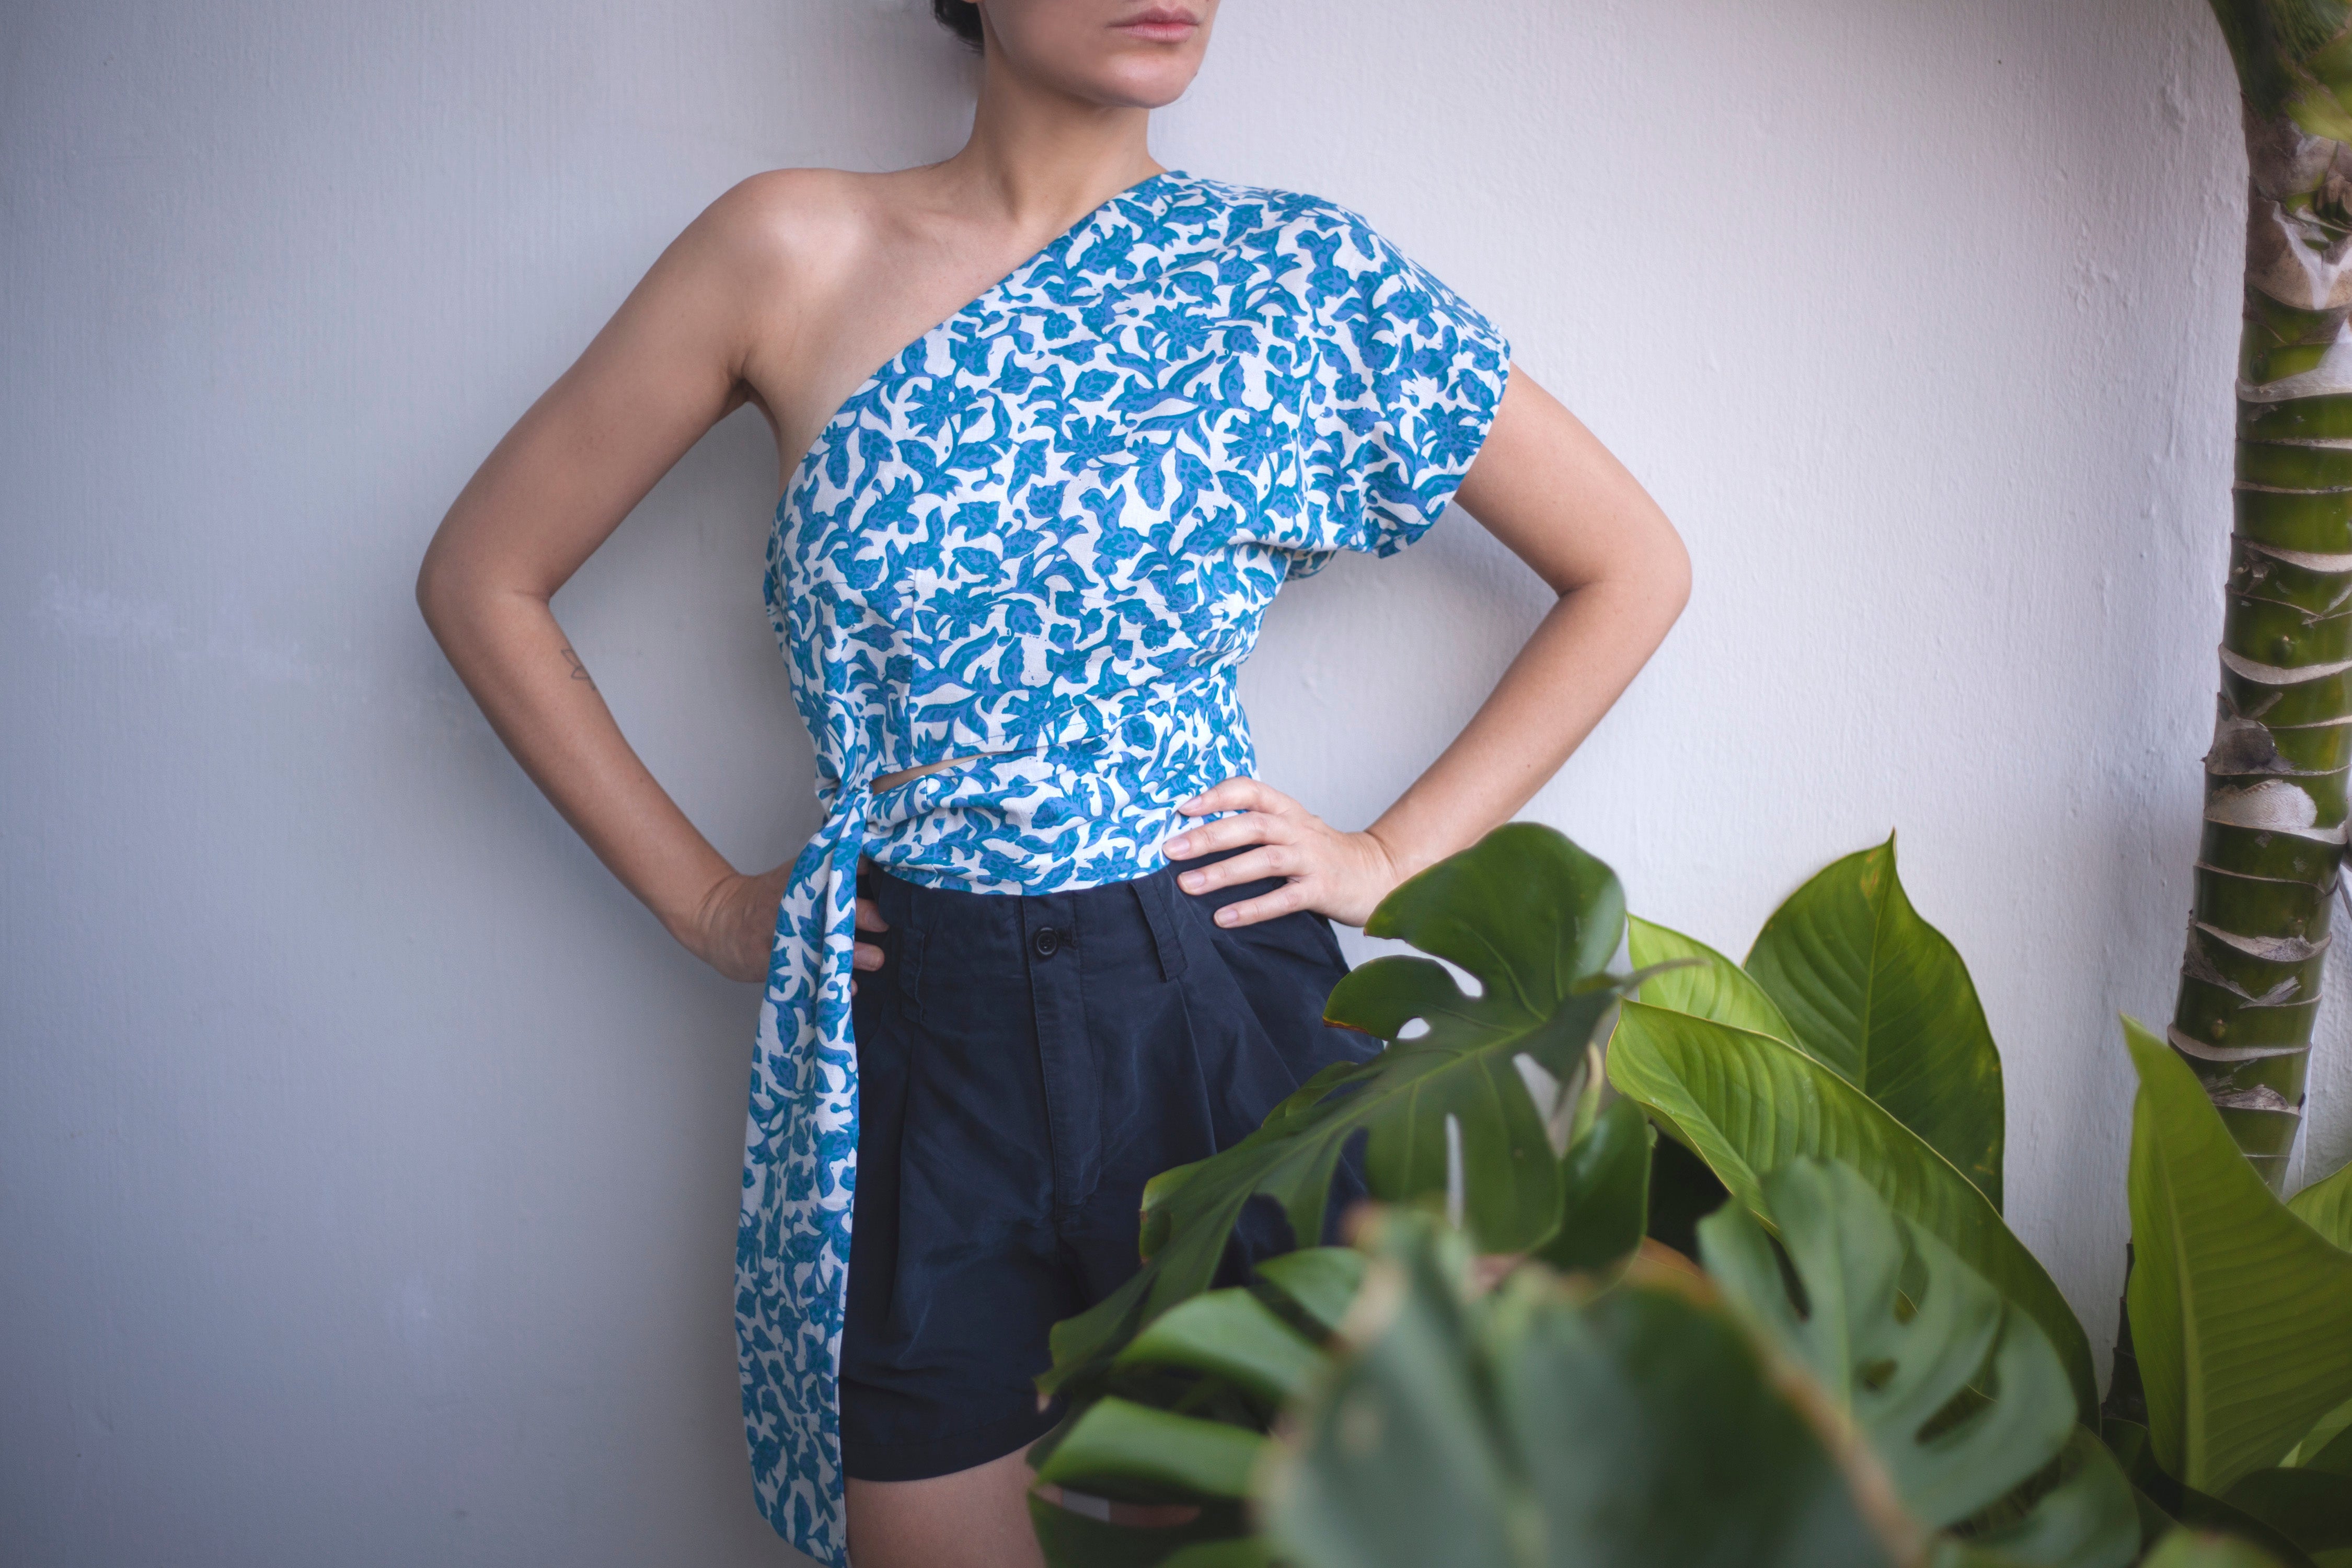 Paloma one shoulder top in Blue Pea